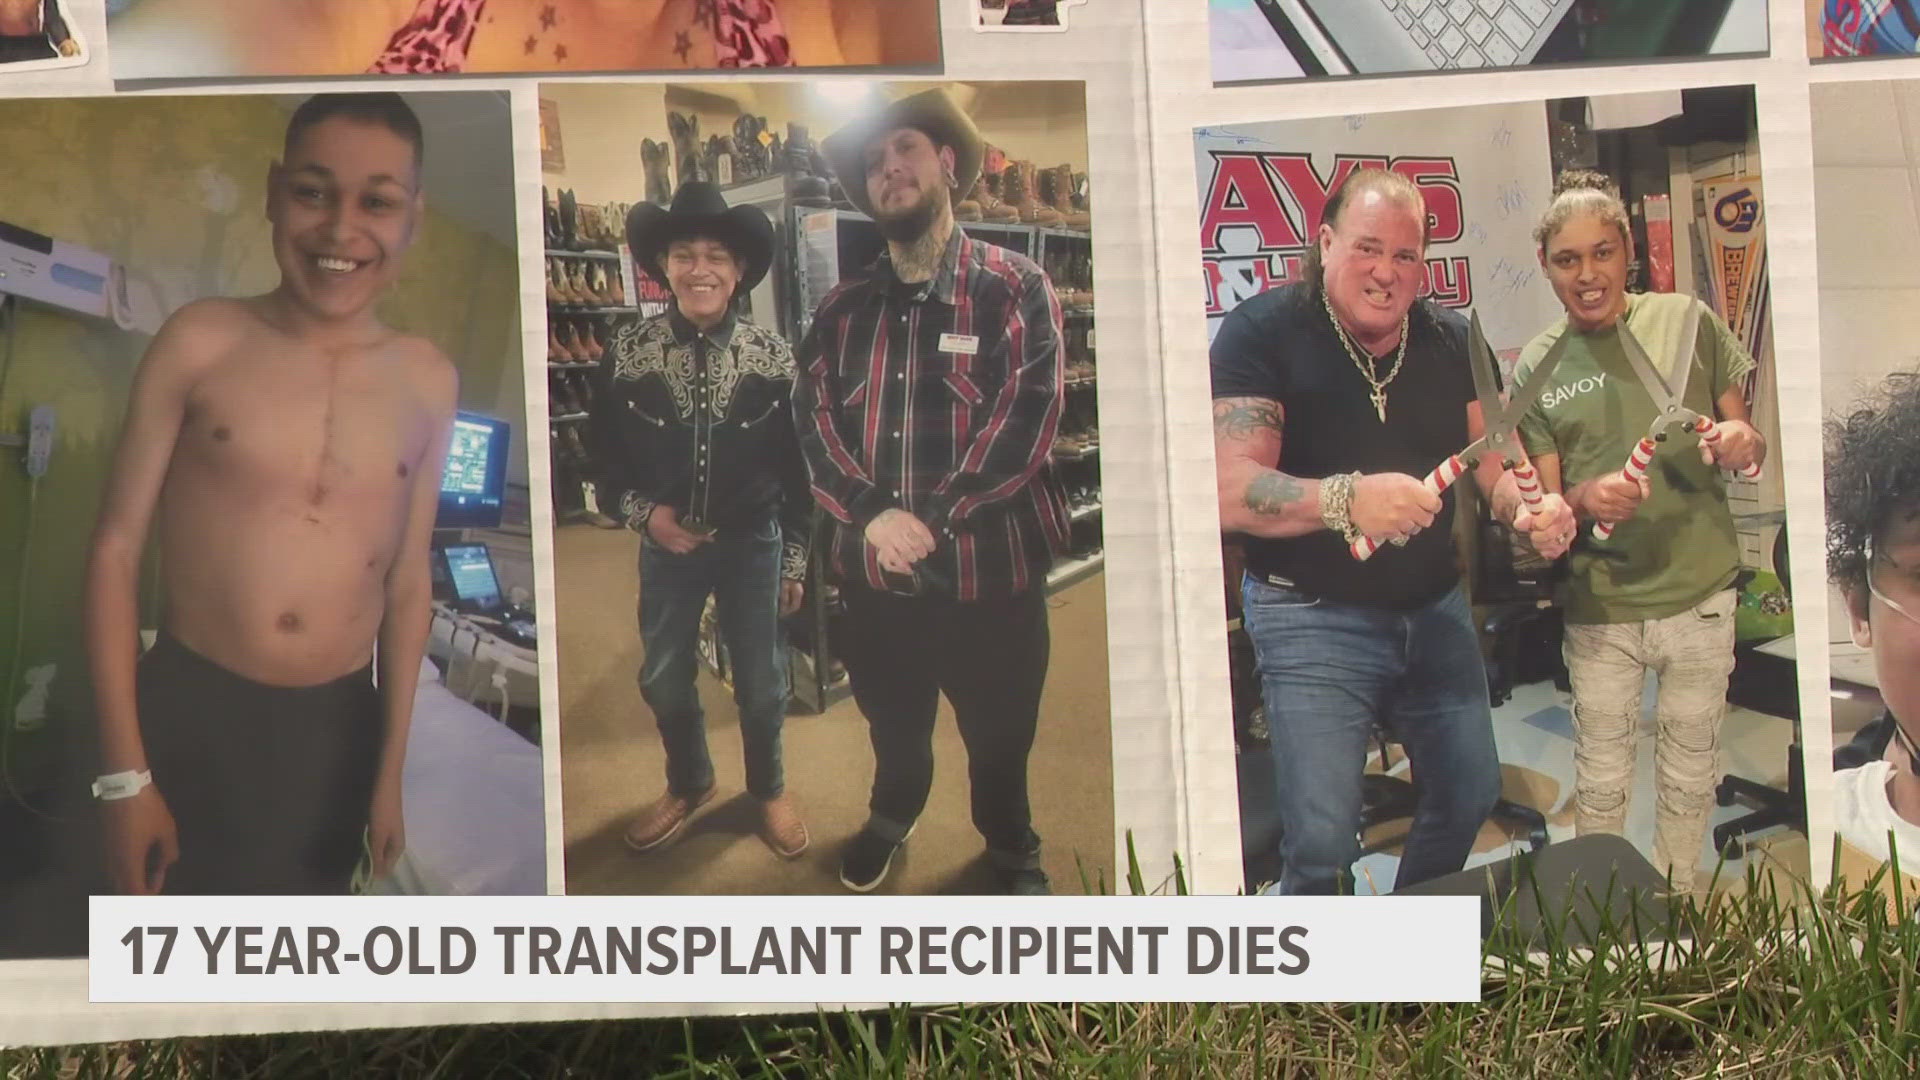 An Iowa mother loses her son after an organ transplant. Her message to those who are considering organ donation.